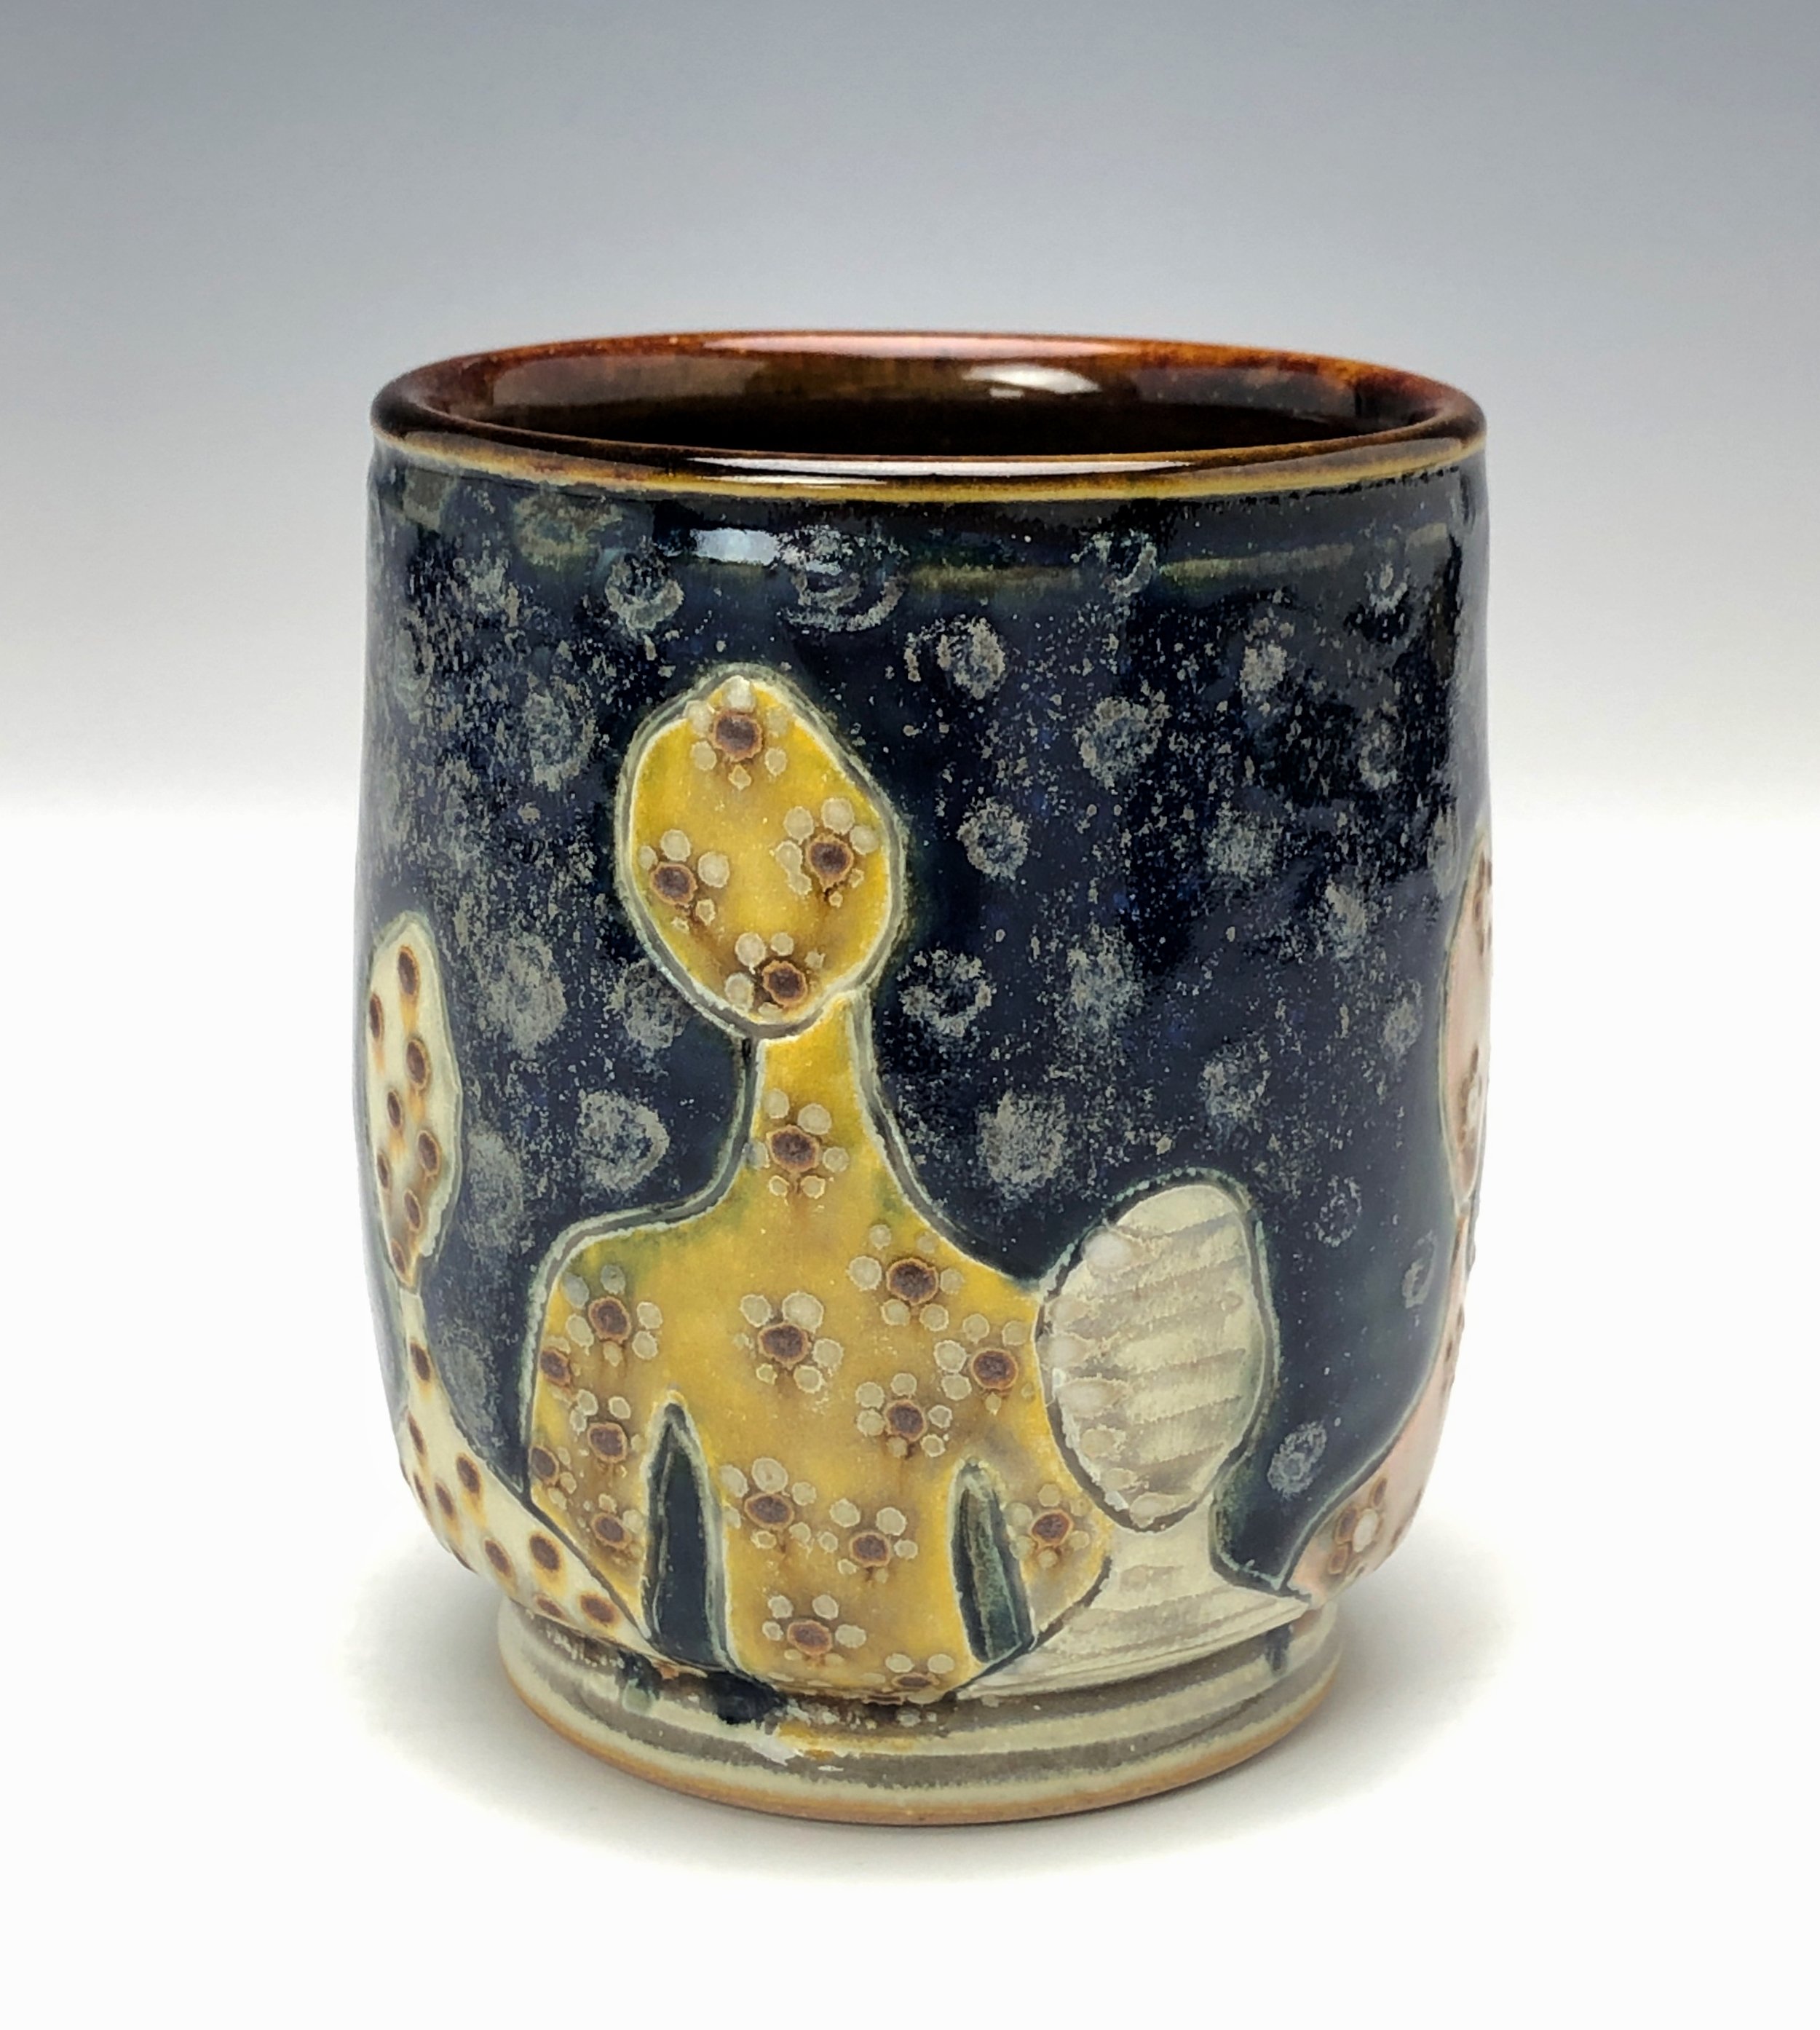  Samantha Henneke, Bulldog Pottery, Seagrove, North Carolina  Yunomi 4- Casual drinking cup made from a smooth white porcelaneous clay body. Figurative decoration with slip and glaze dot patterns. Translucent vellum glaze over various underglaze colo